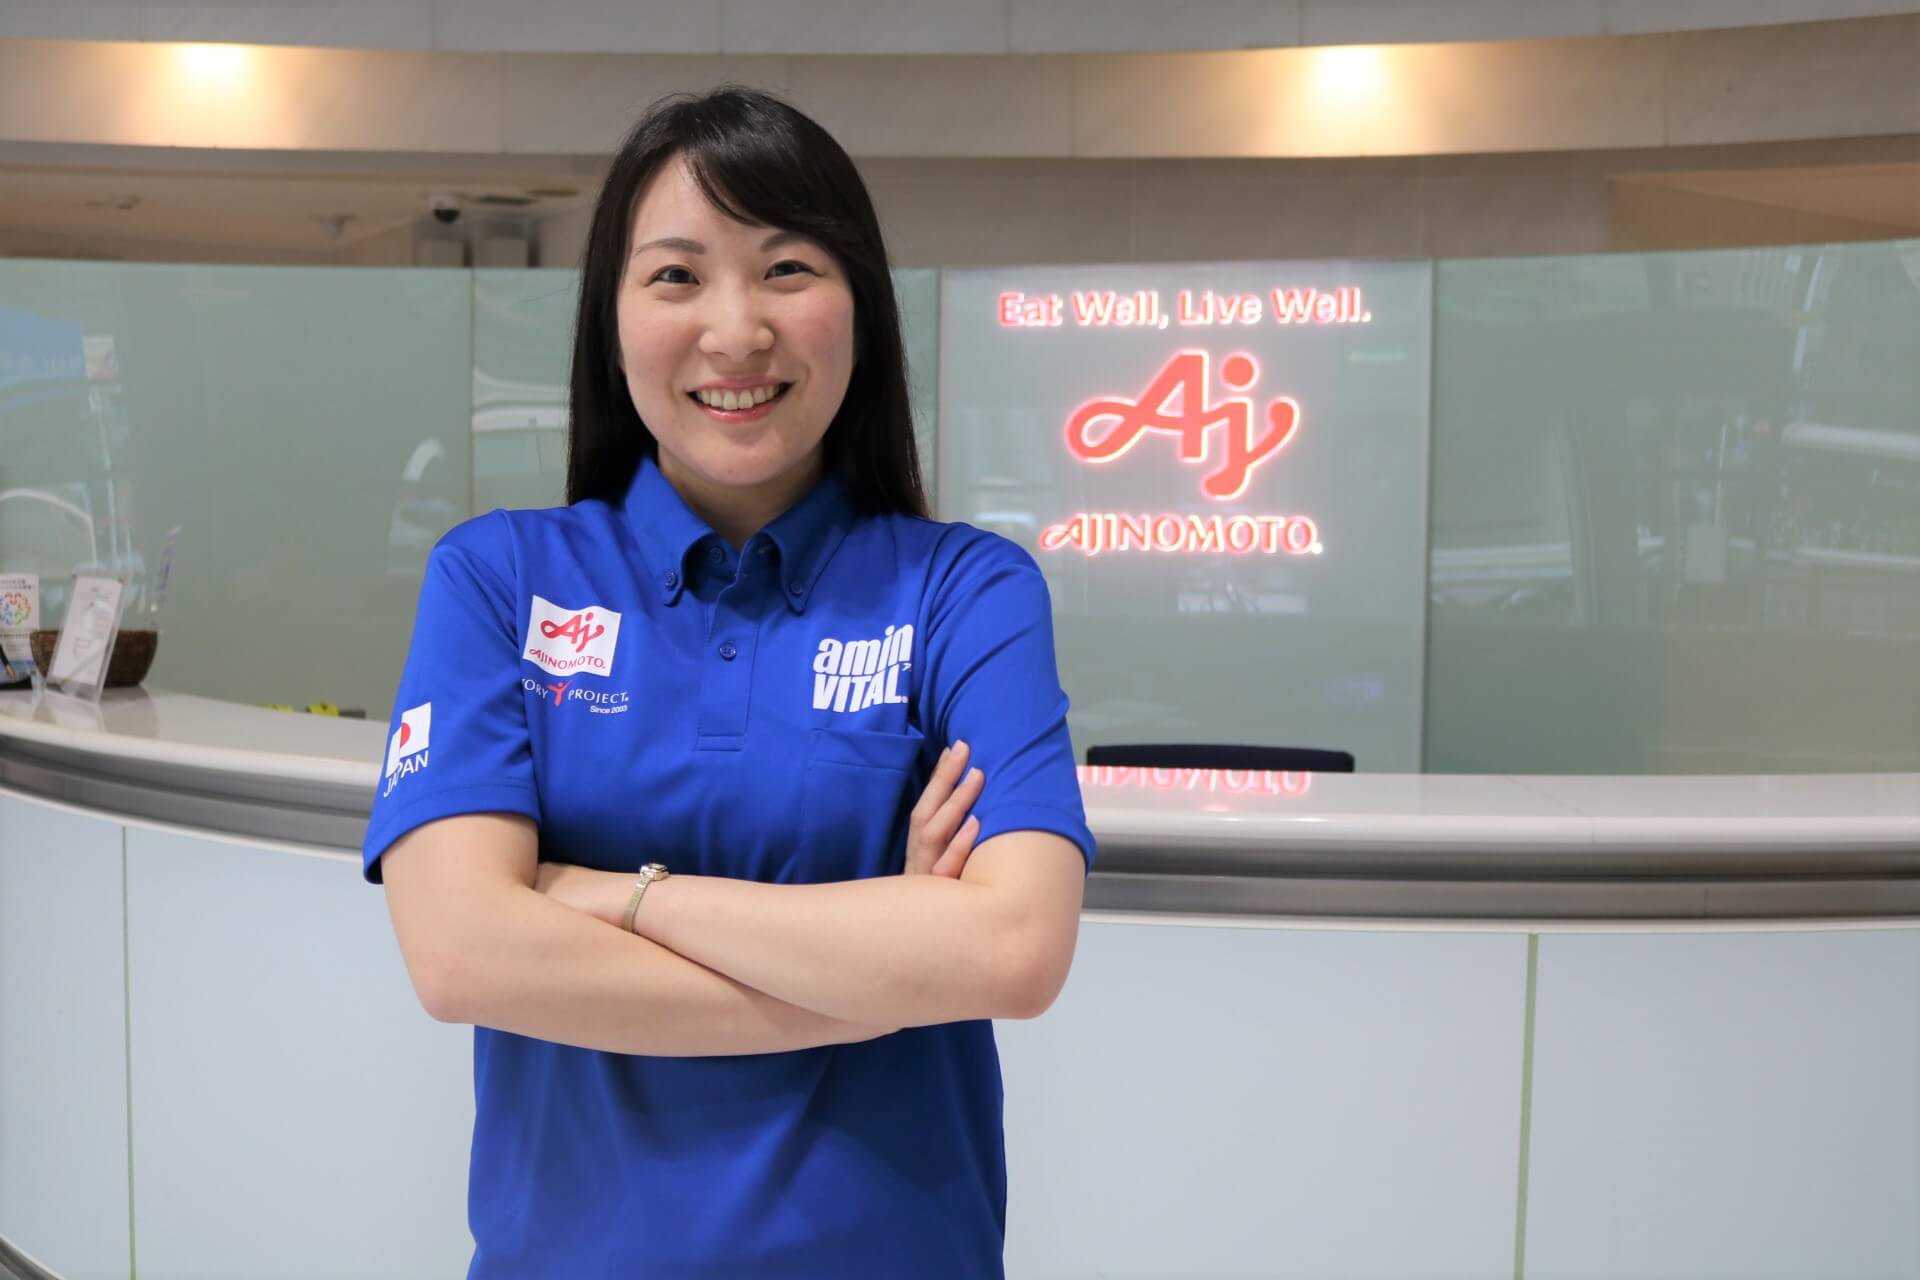 Haruka Suzuki, a registered nutritionist and a Victory Project® member